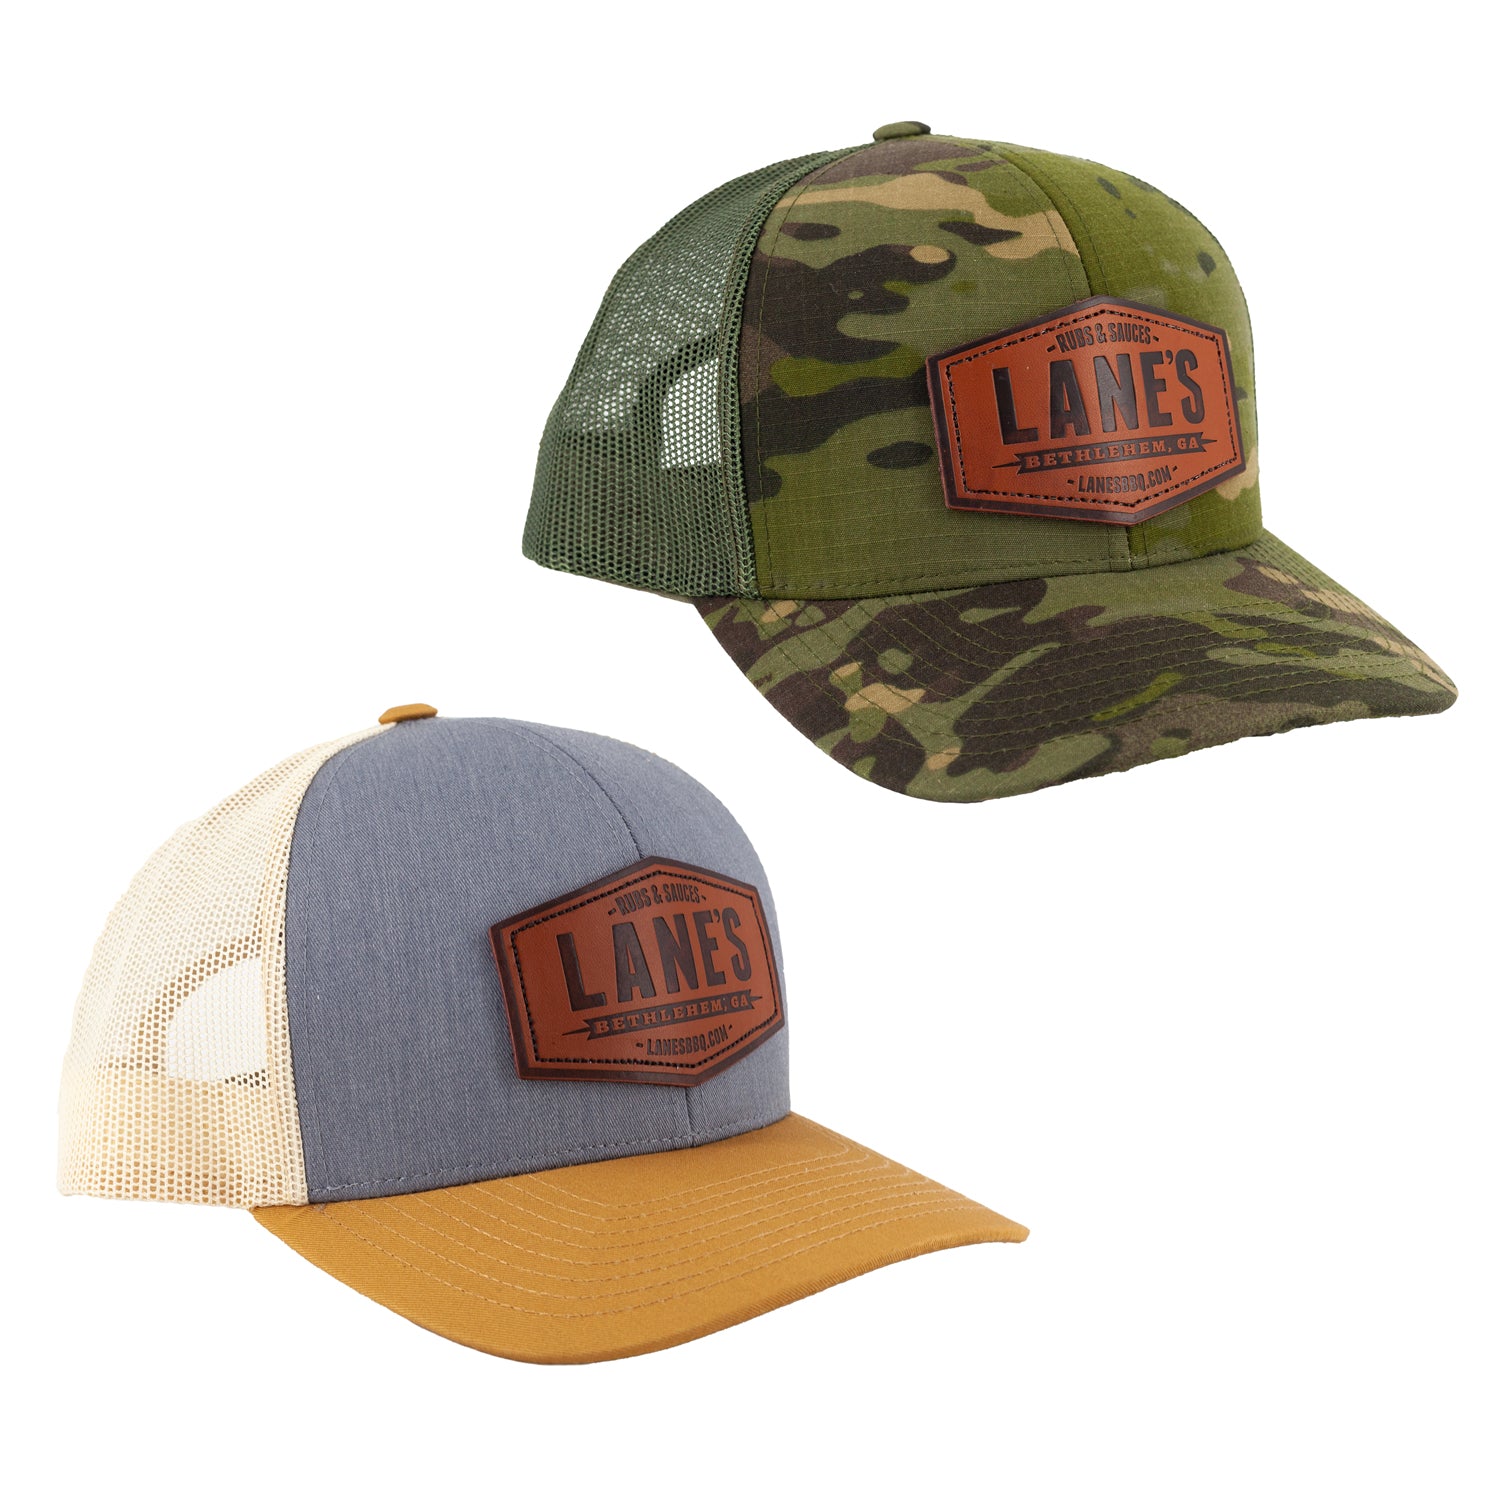 Lane's Leather Patch Hat